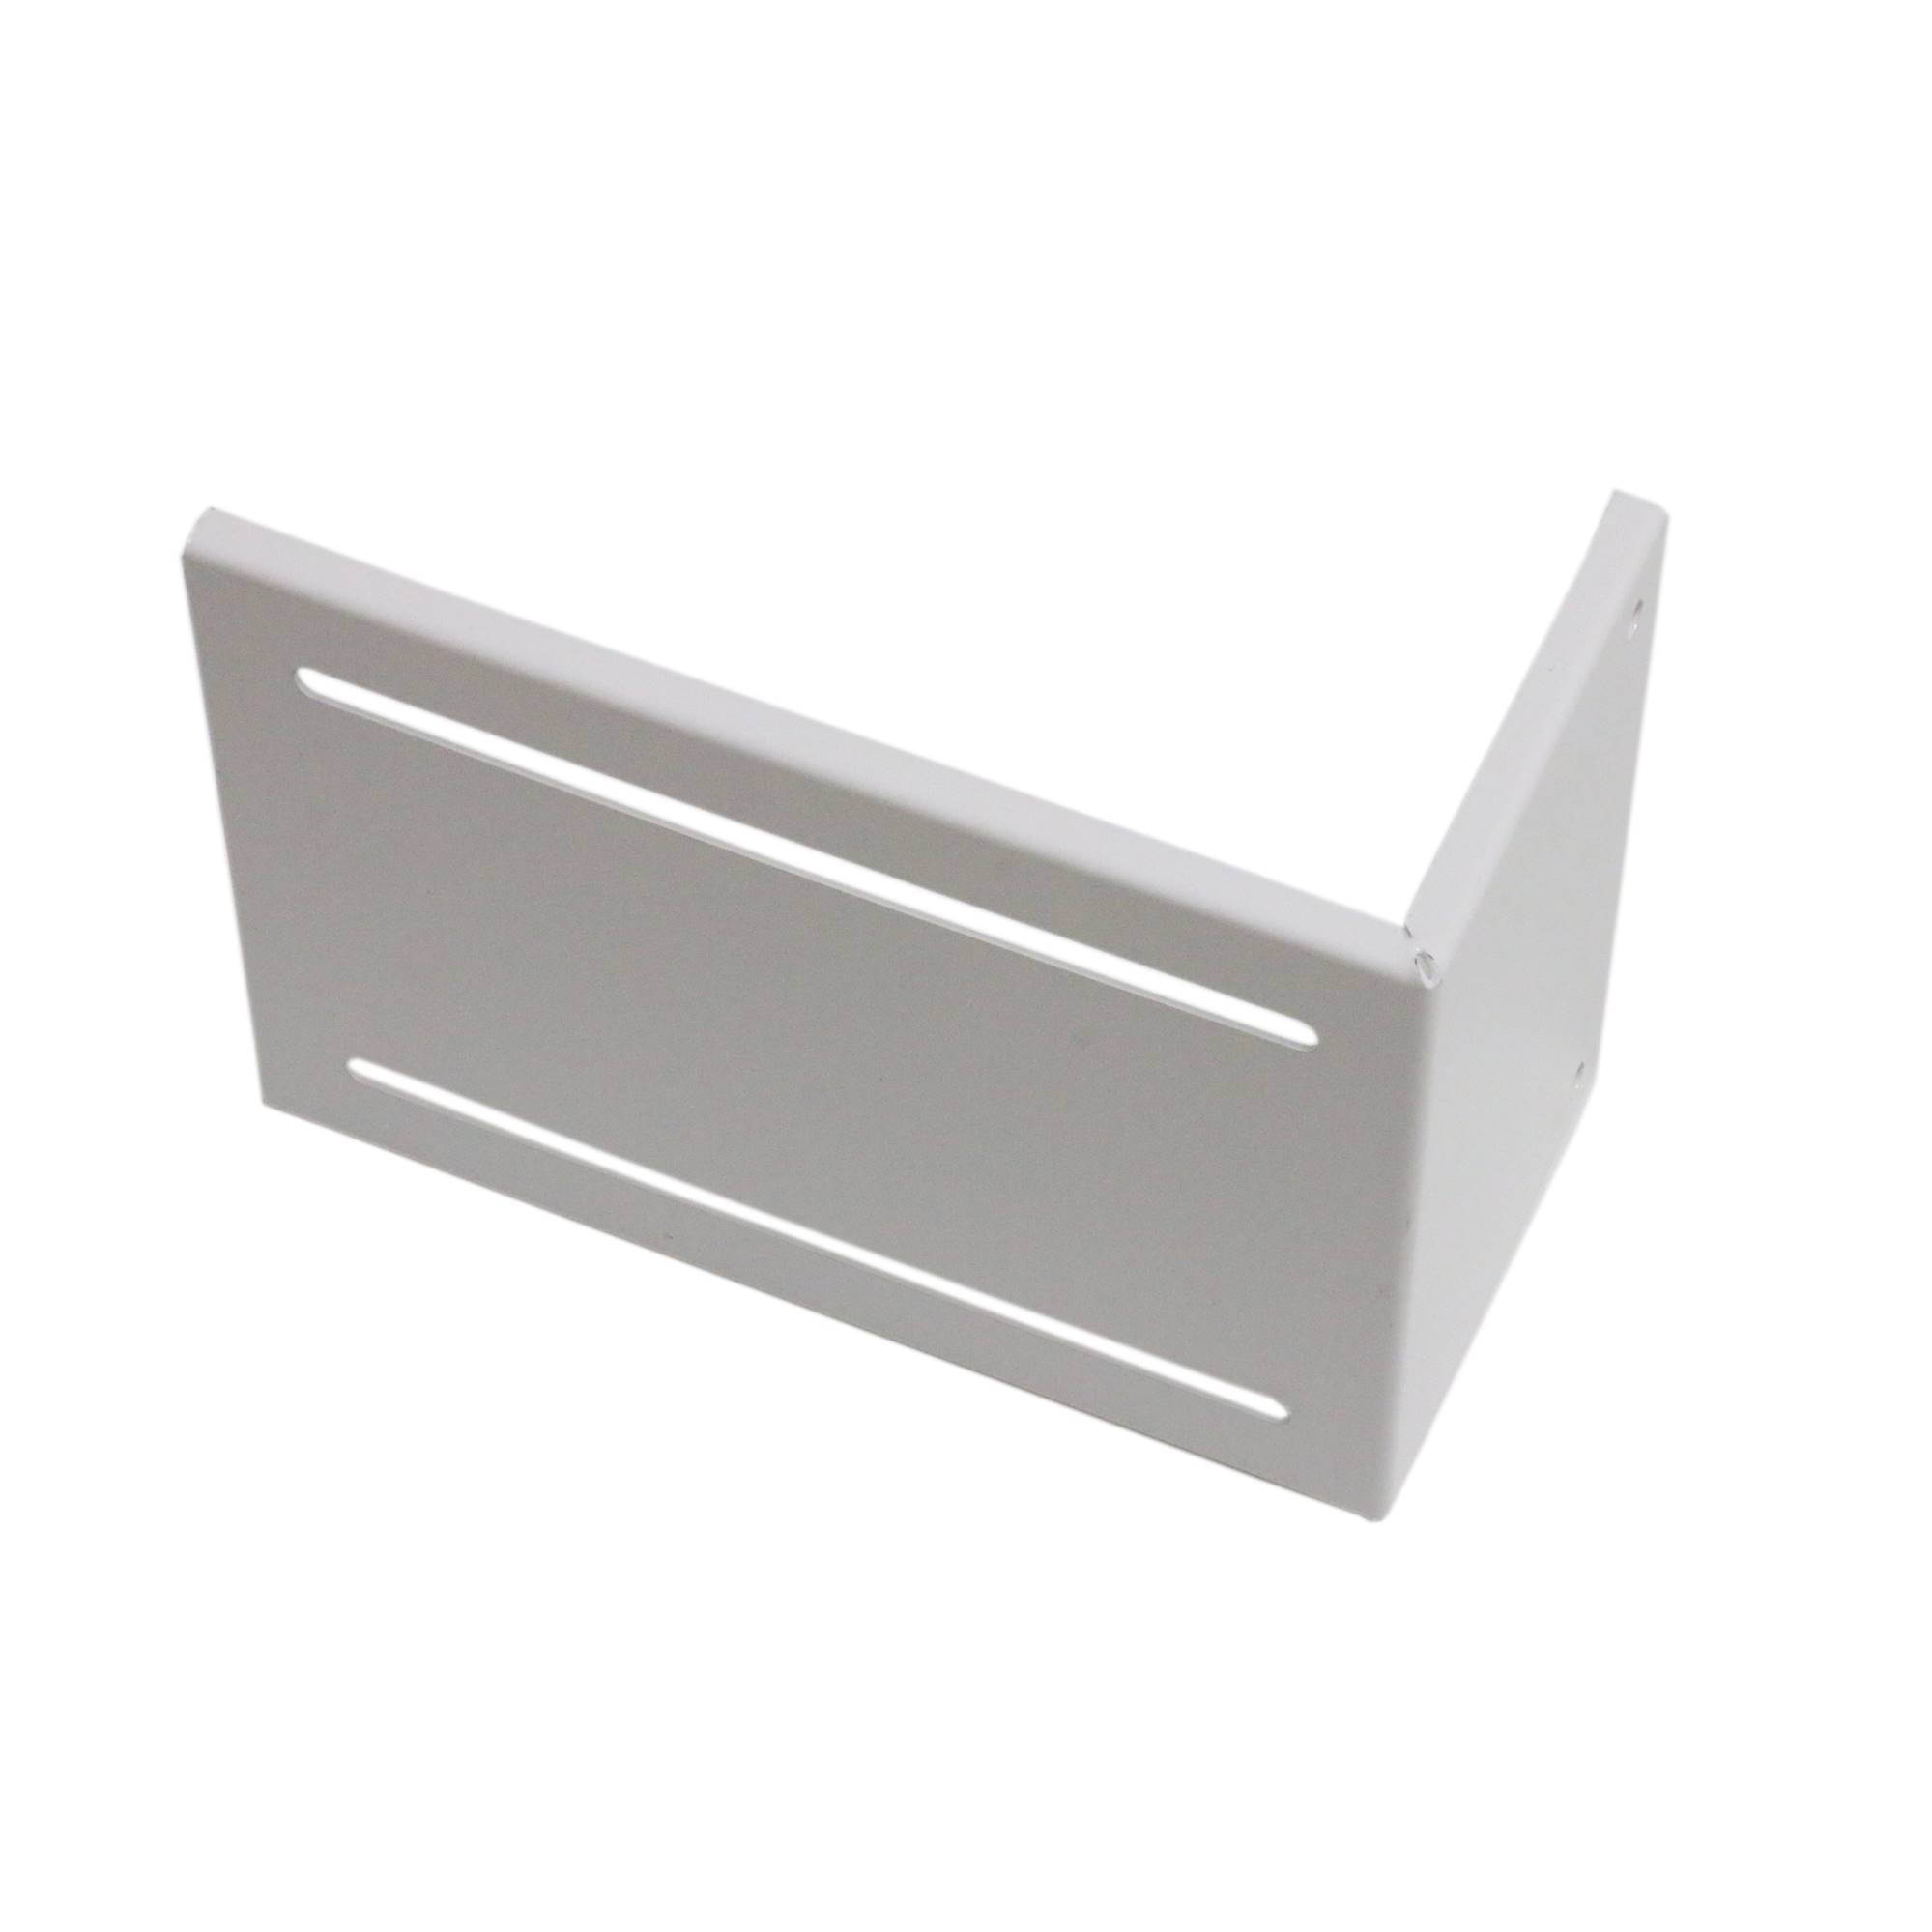 Awoco Air Curtain Mounting Brackets for Ceiling Mount or Side Mount